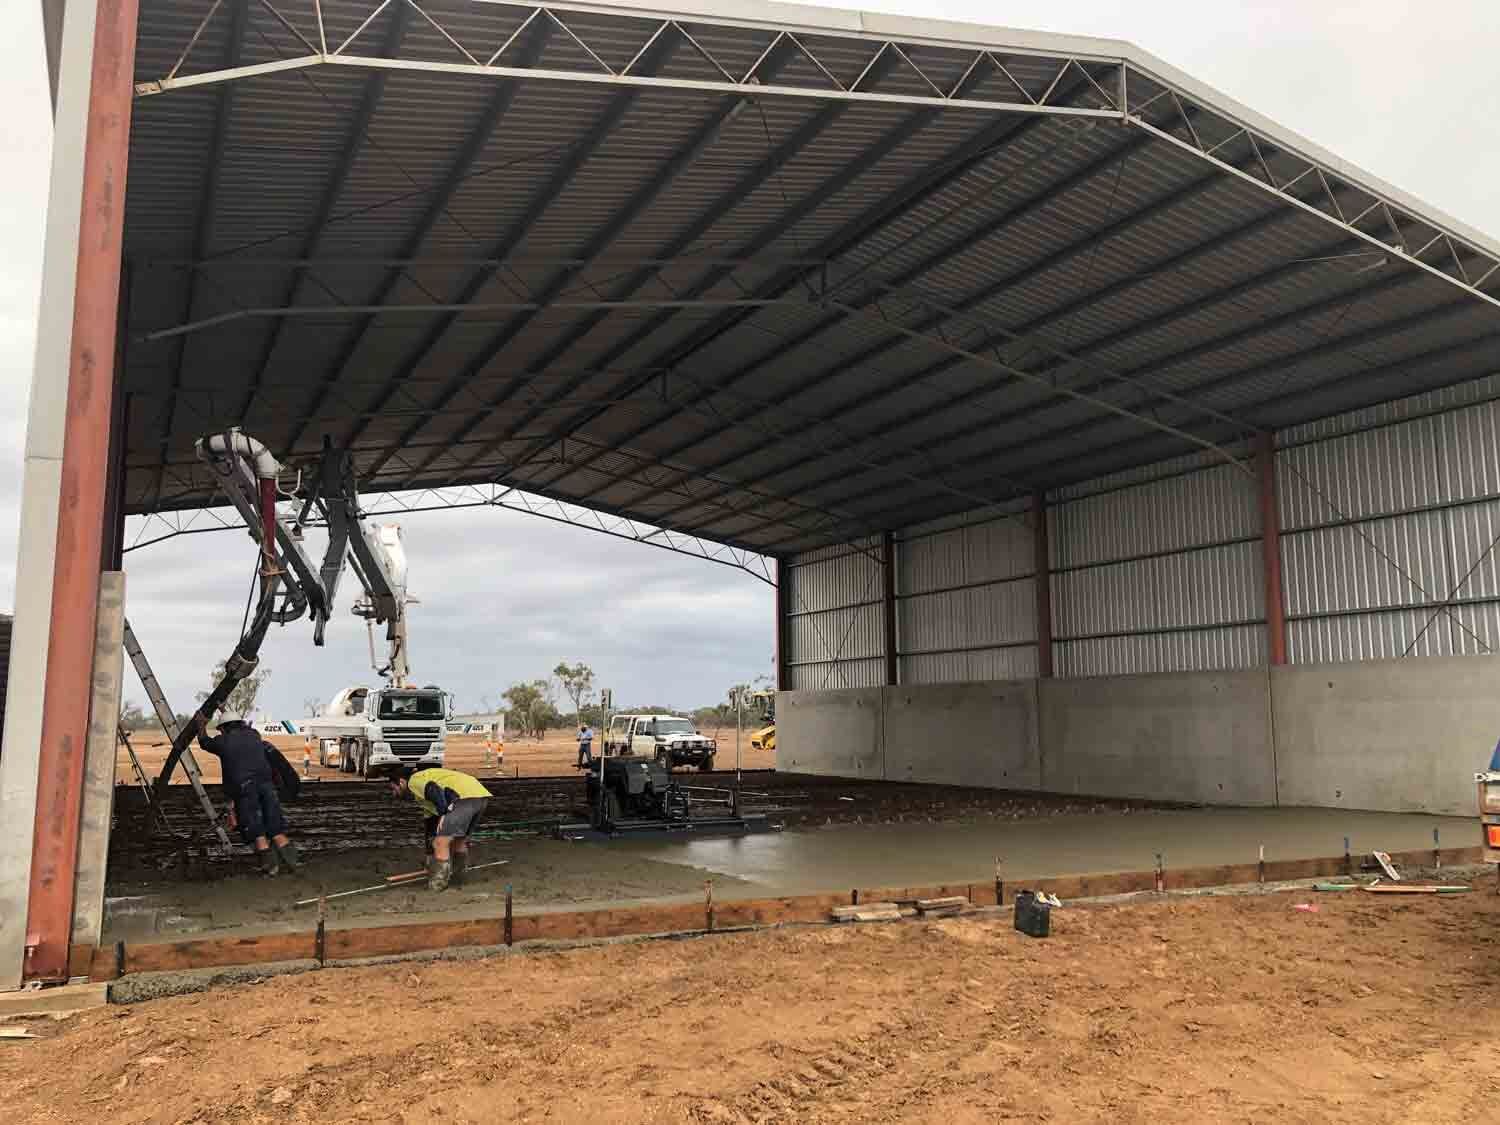 Construction workers concreting floor - Concreting in Dubbo, Central West	